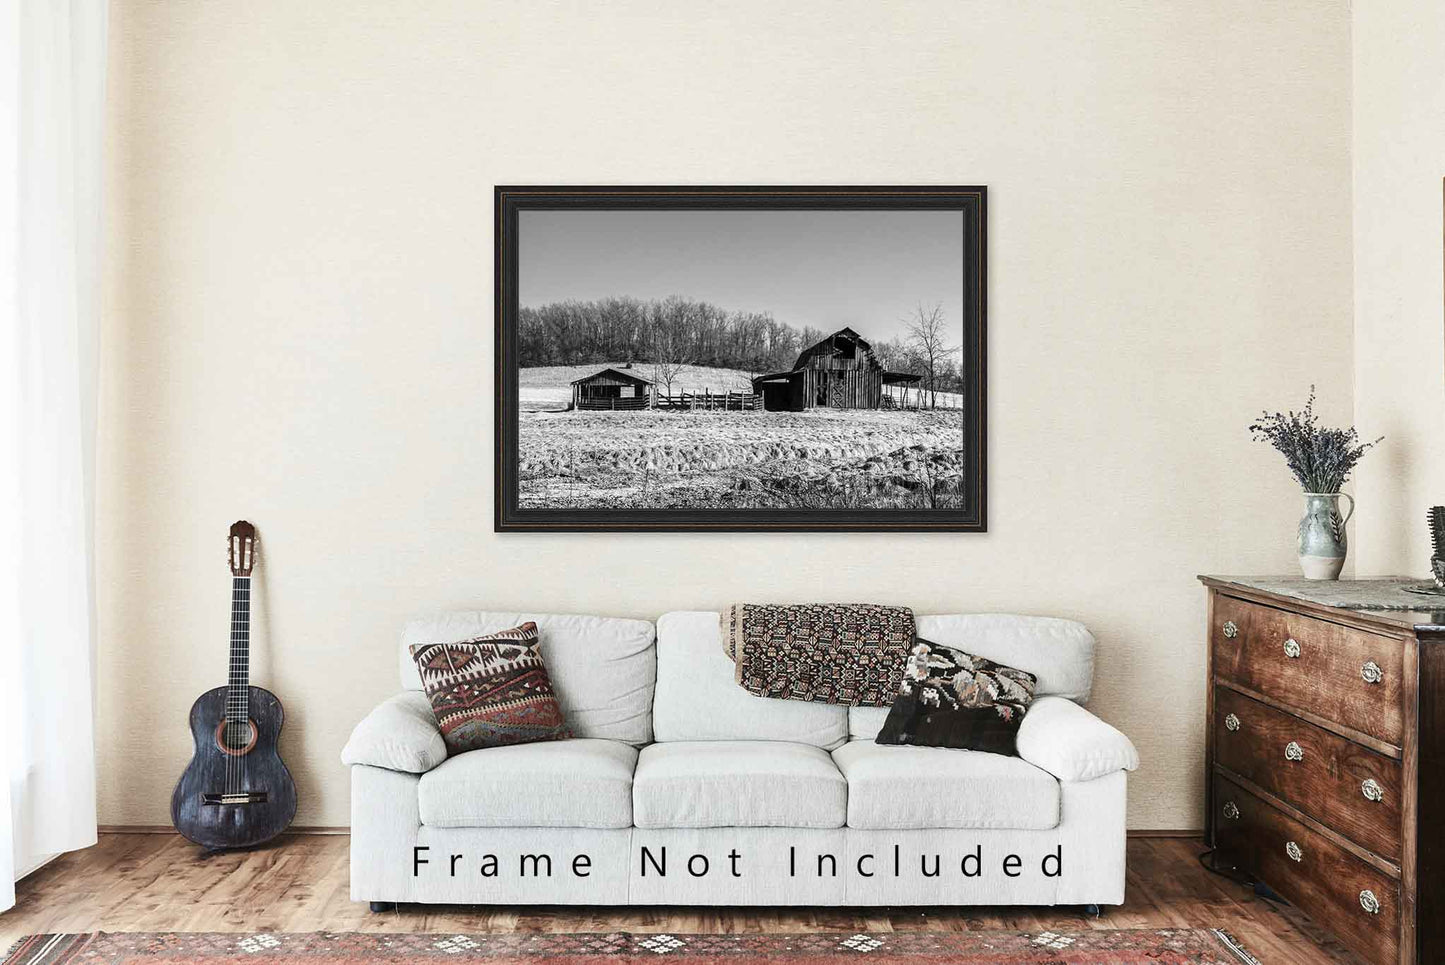 Black and White Photography Print - Picture of Old Barn with Pen and Corral in Western Arkansas Country Style Home Decor 4x6 to 24x36